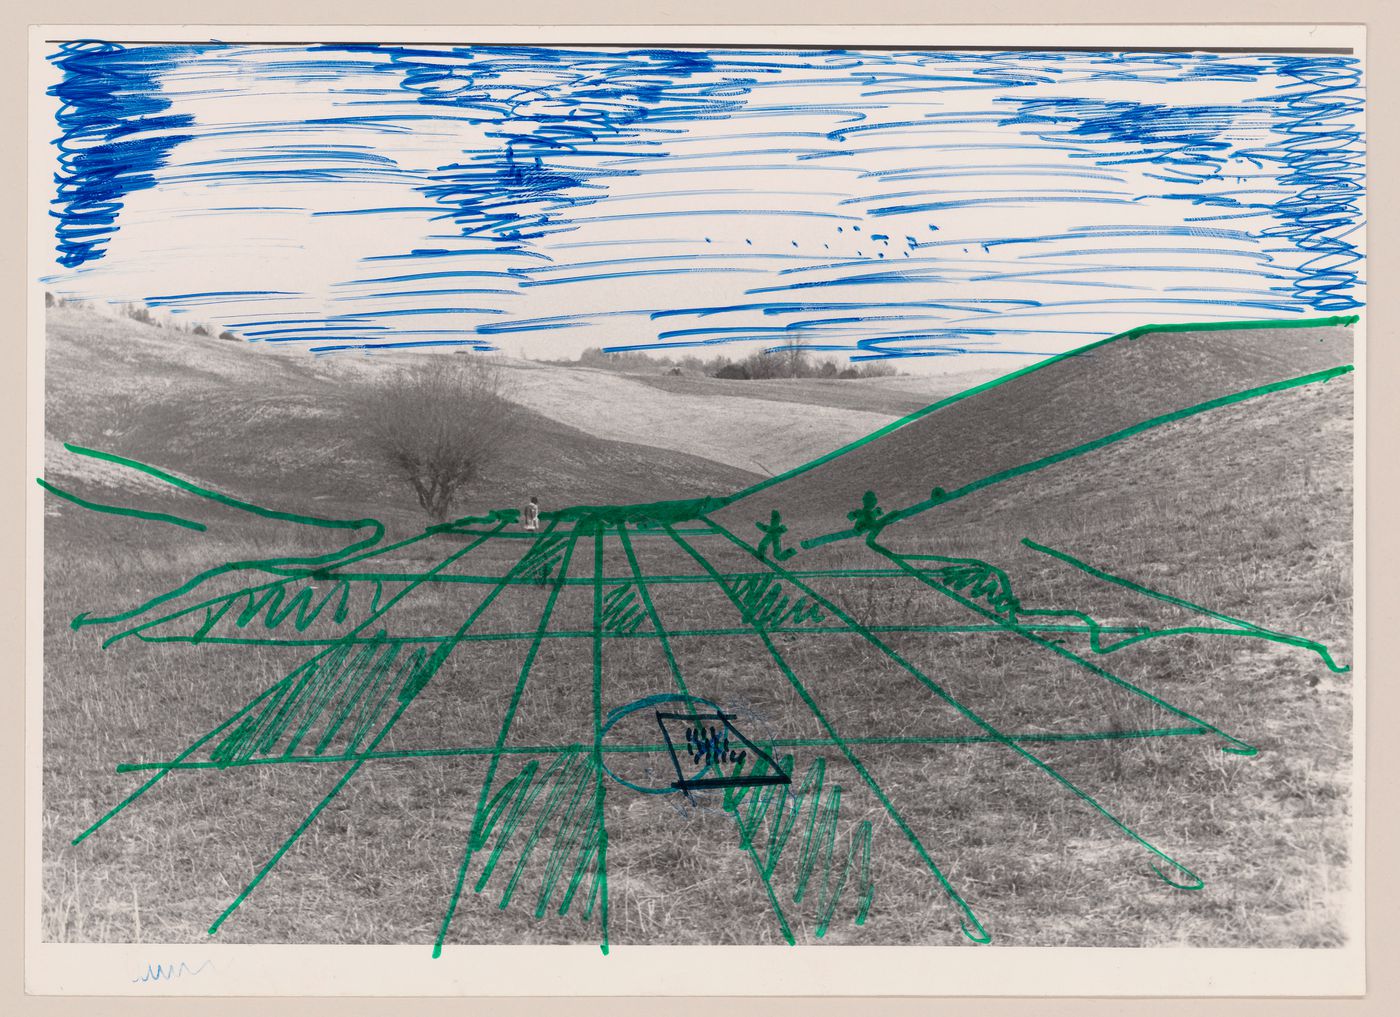 Photograph of the Siena landscape with sketches of the Supersurface grid and a plug-in node for Supersuperficie [Supersurface]